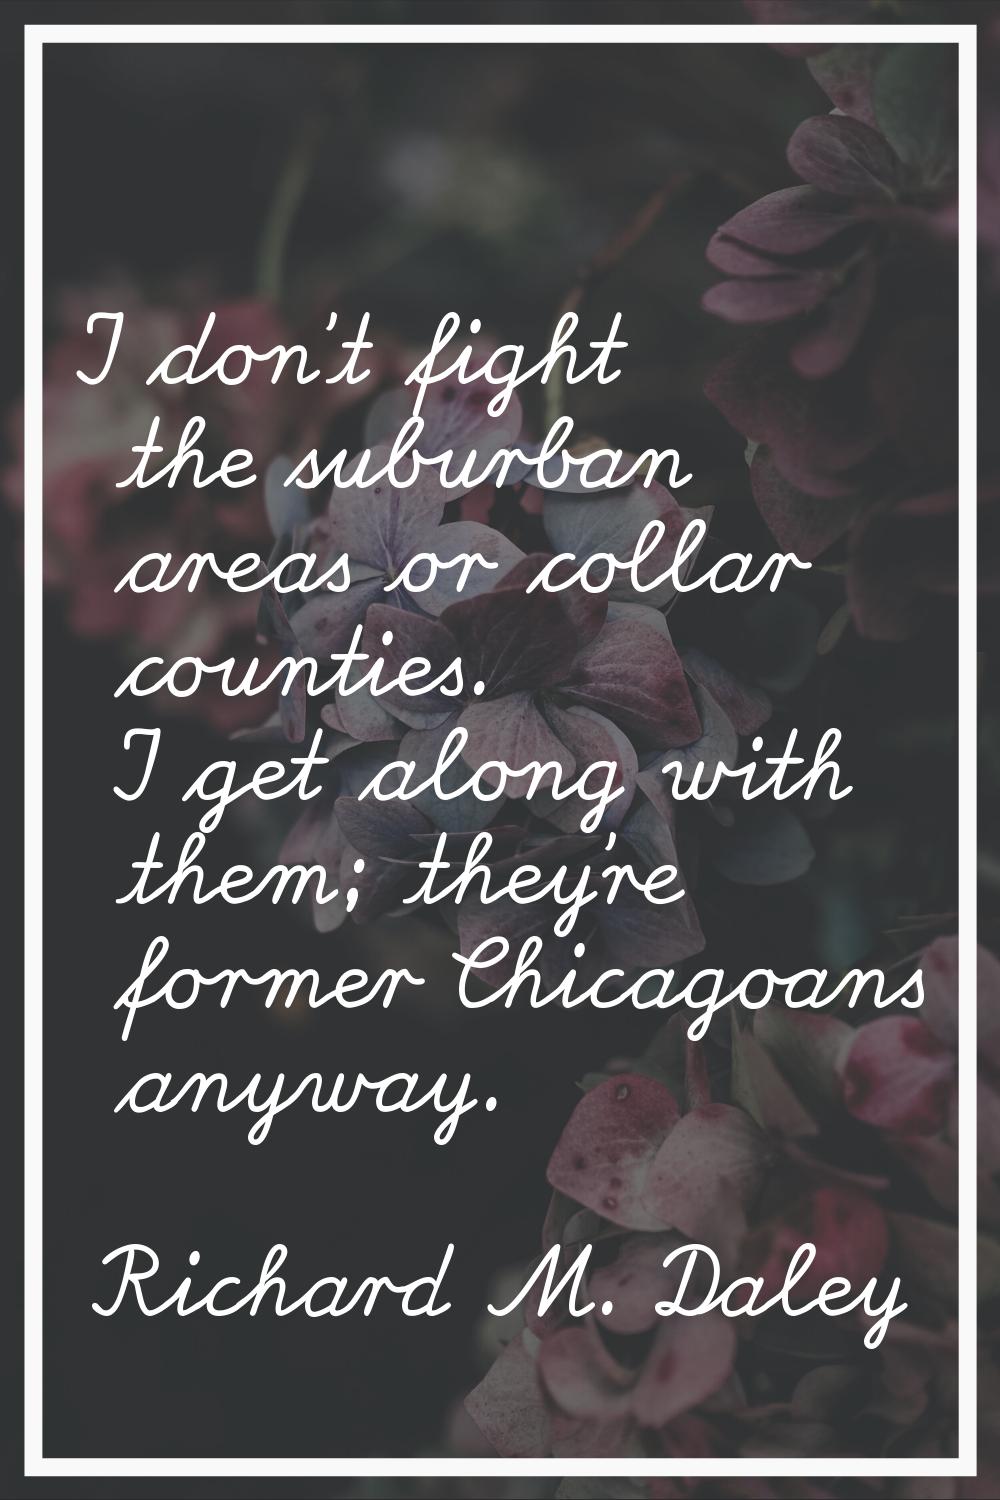 I don't fight the suburban areas or collar counties. I get along with them; they're former Chicagoa